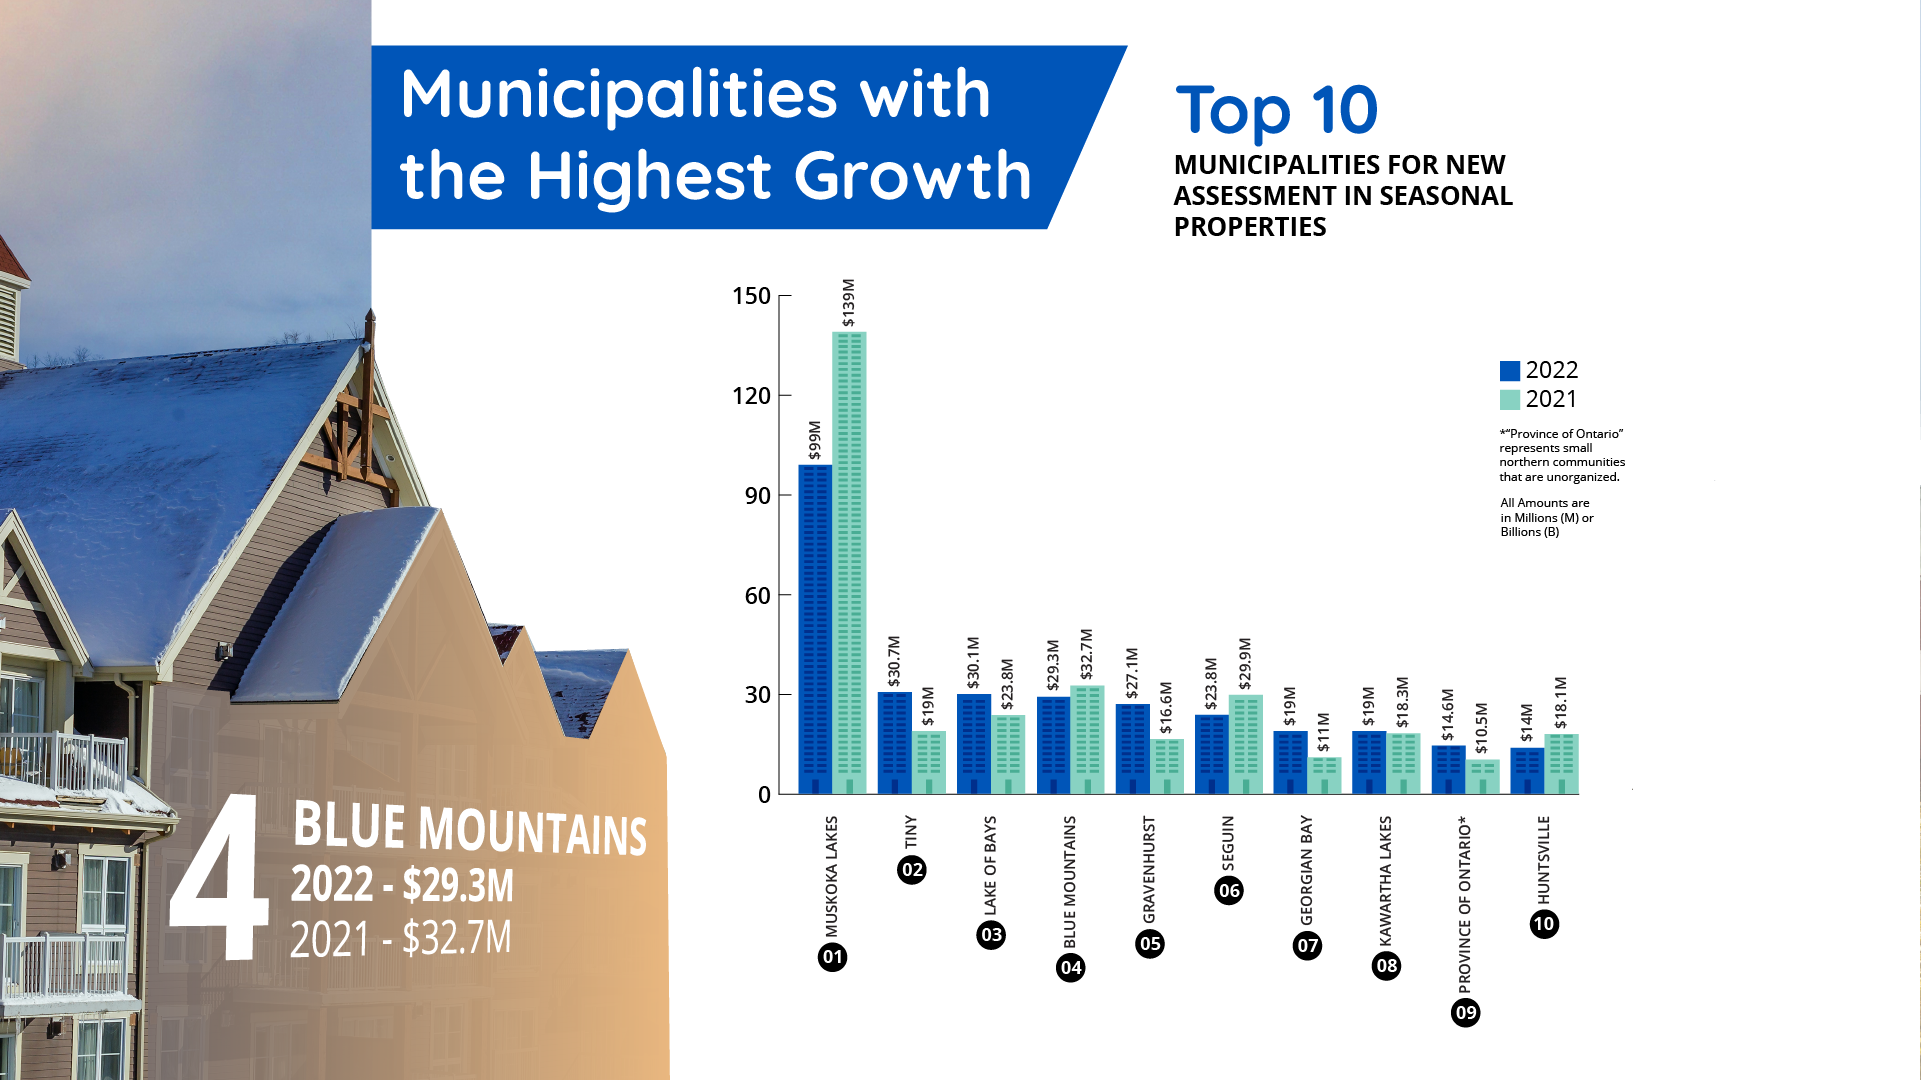 Visual of the top 10 municipalities for new assessment in seasonal properties.